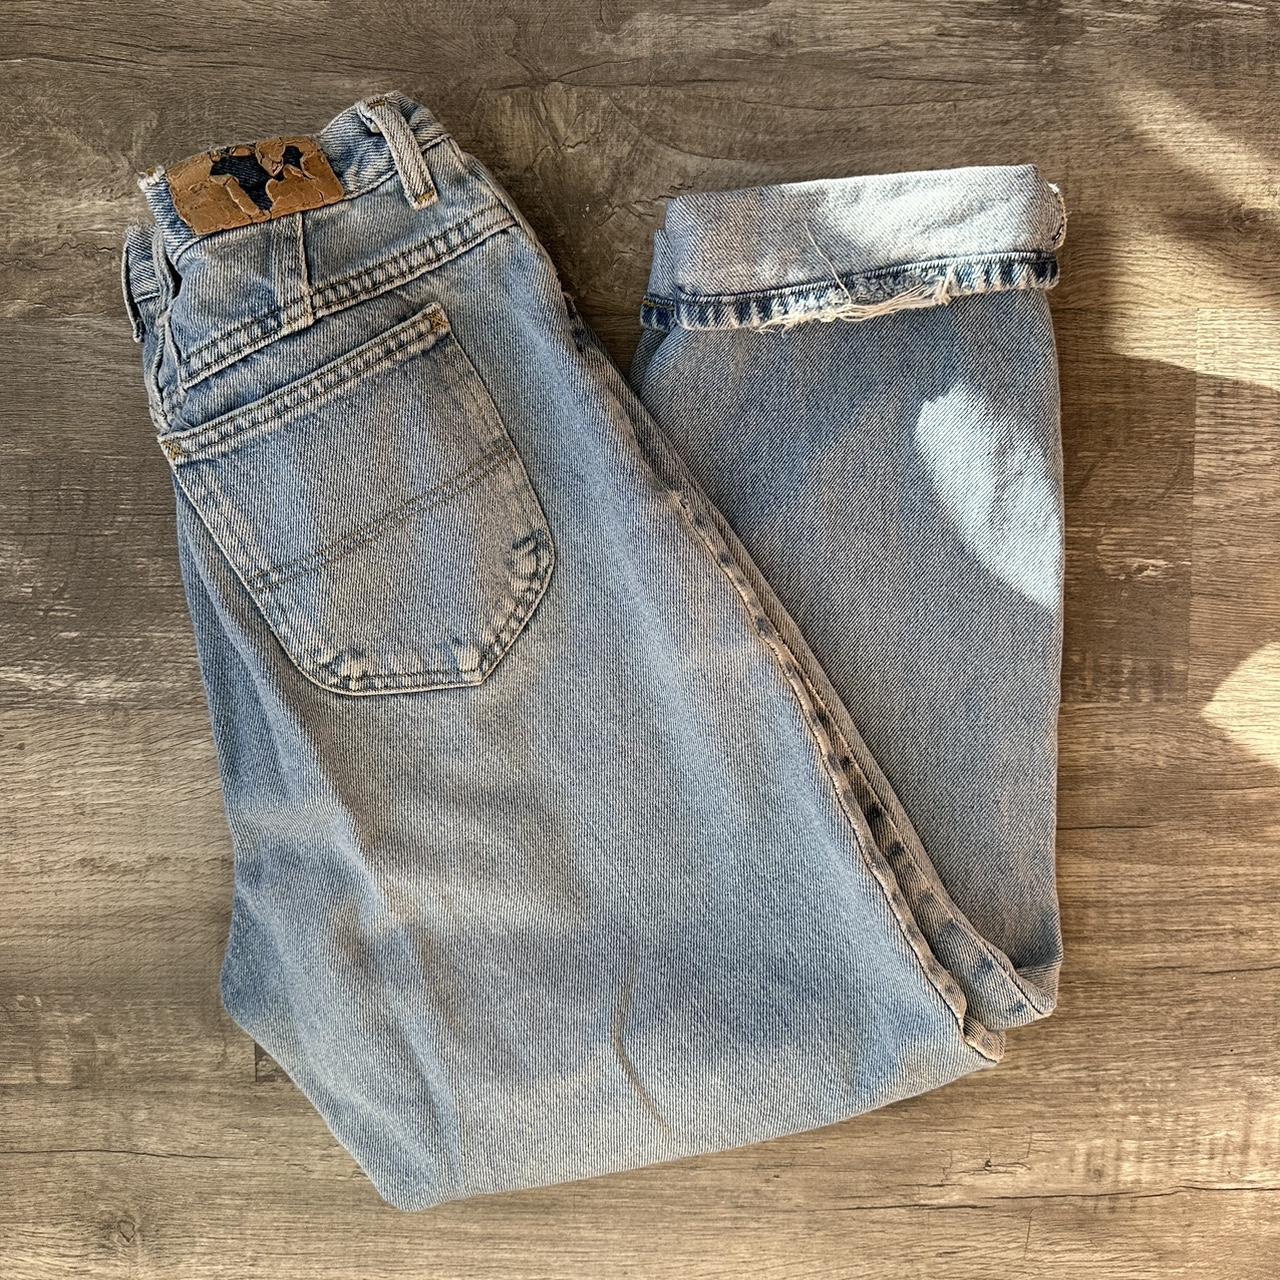 vintage Riders by Lee light wash jeans! loose and... - Depop